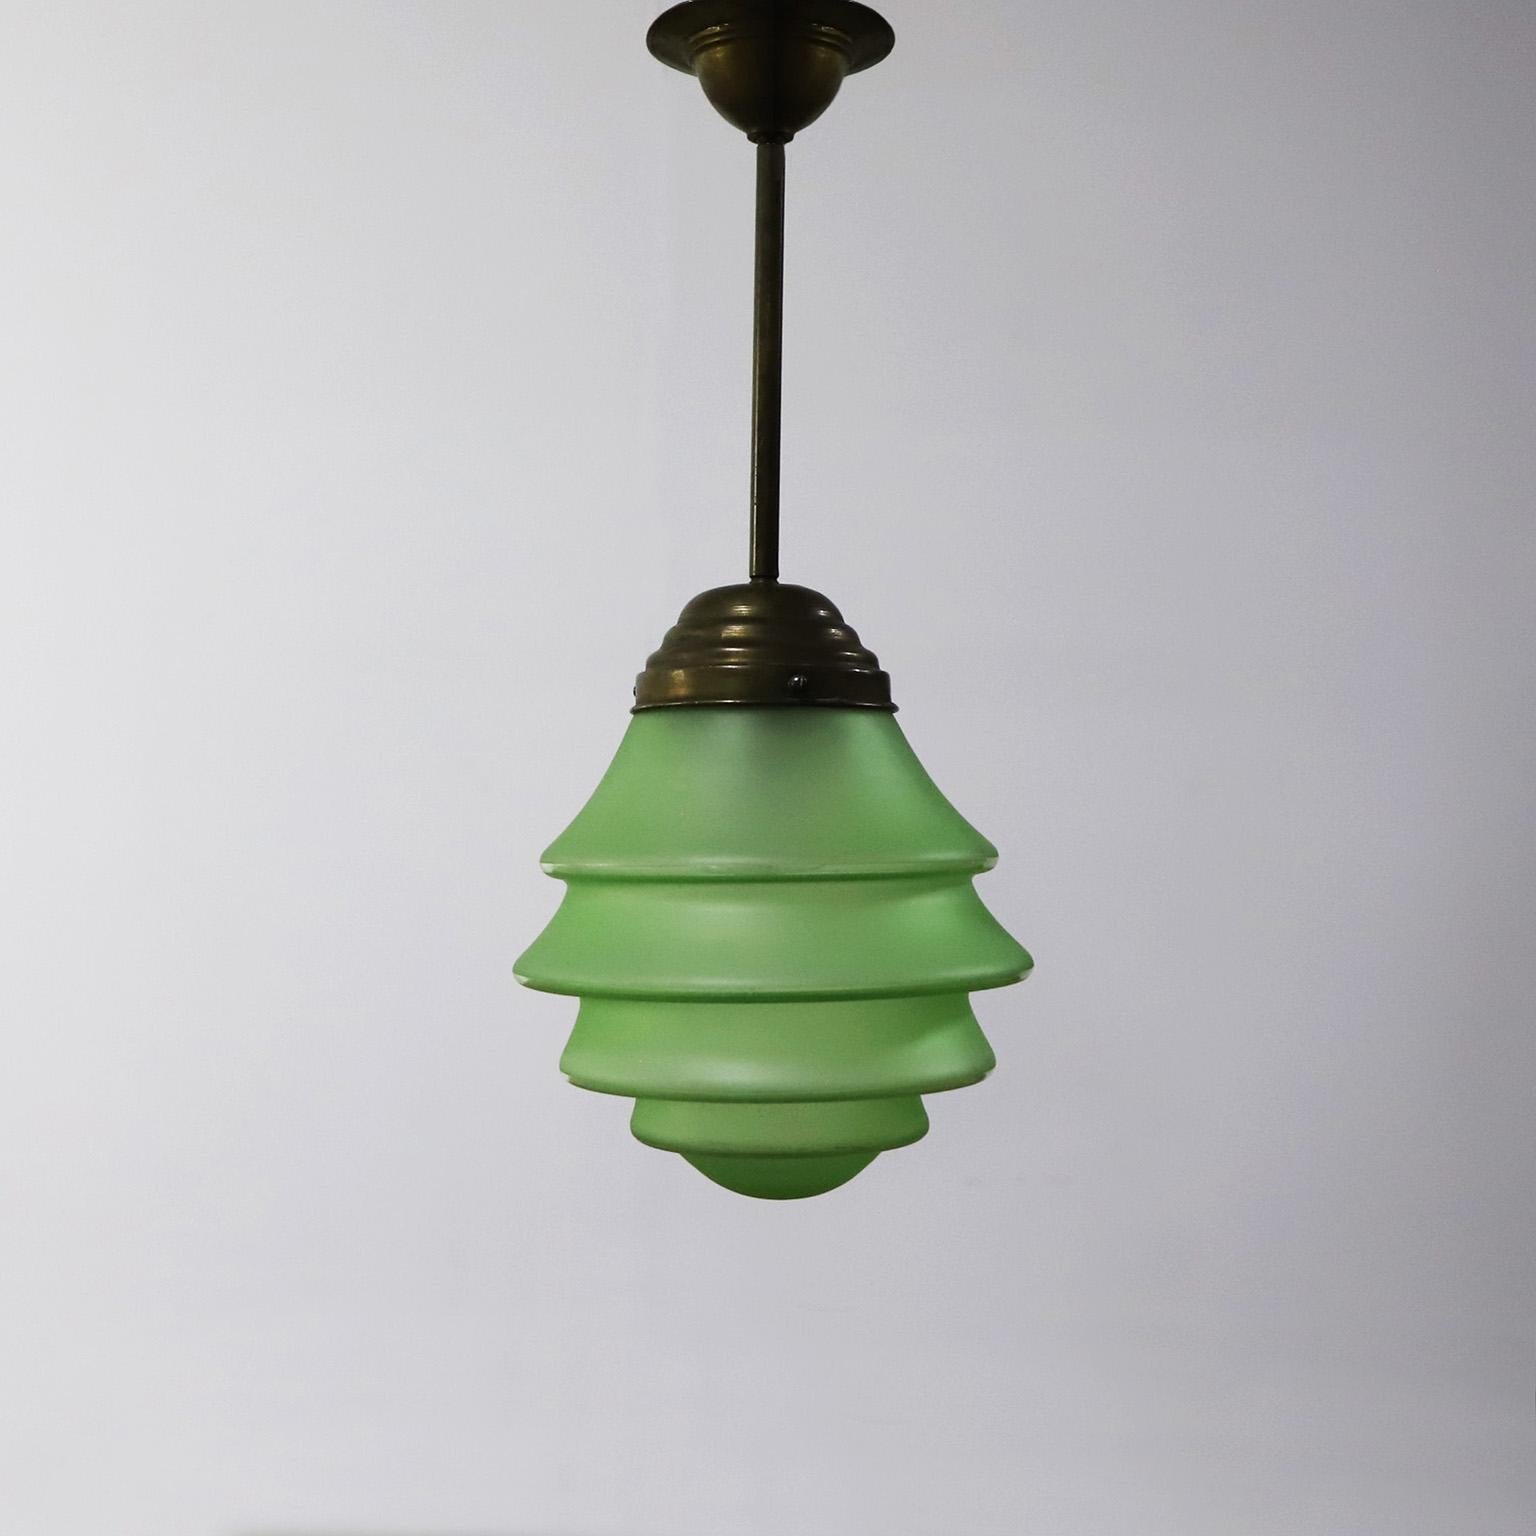 Circa 1930. We offer this Art Deco Pendant Light in Rare Green Opal Glass and Brass, Absolutely a very rare and difficult to find piece due to its beautiful colors, shapes and materials. A beautiful piece of porcelain supports the wire.